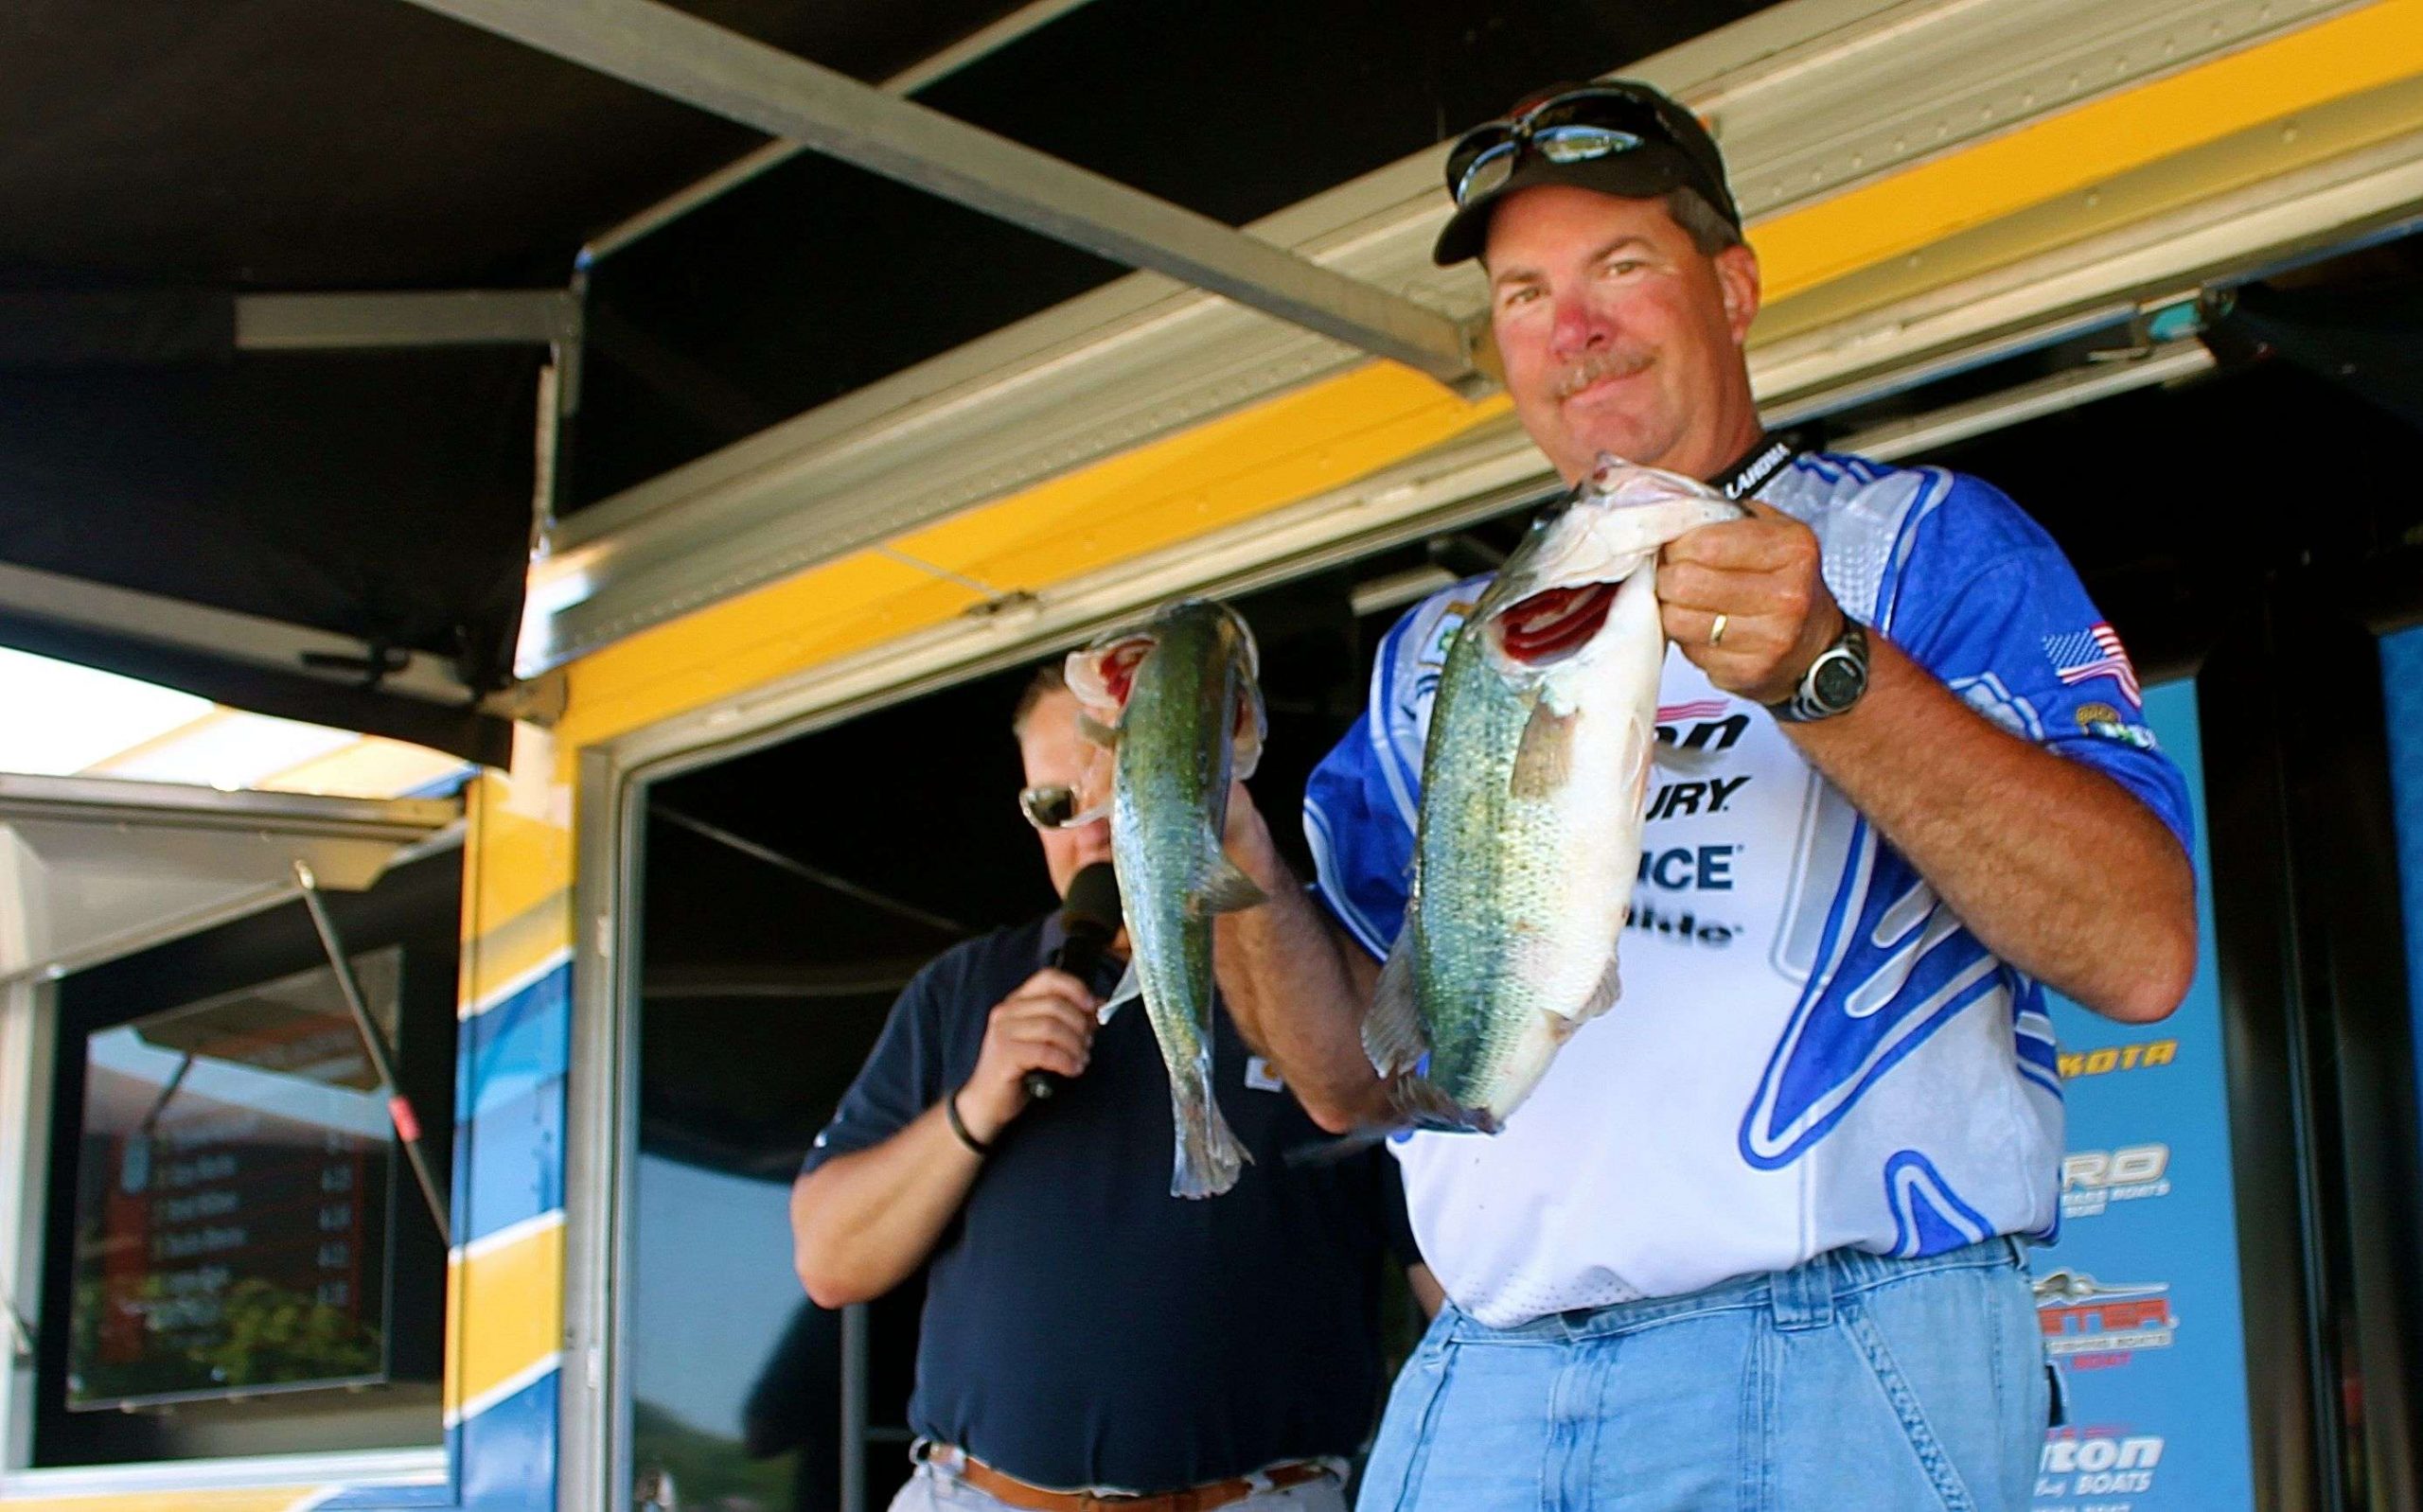 Robert DeGraffenreid, in seventh place with 11 pounds, leads the Oklahoma B.A.S.S. Nation team. Oklahoma leads in the team competition, with 34 bass for 82 pounds, 7 ounces.